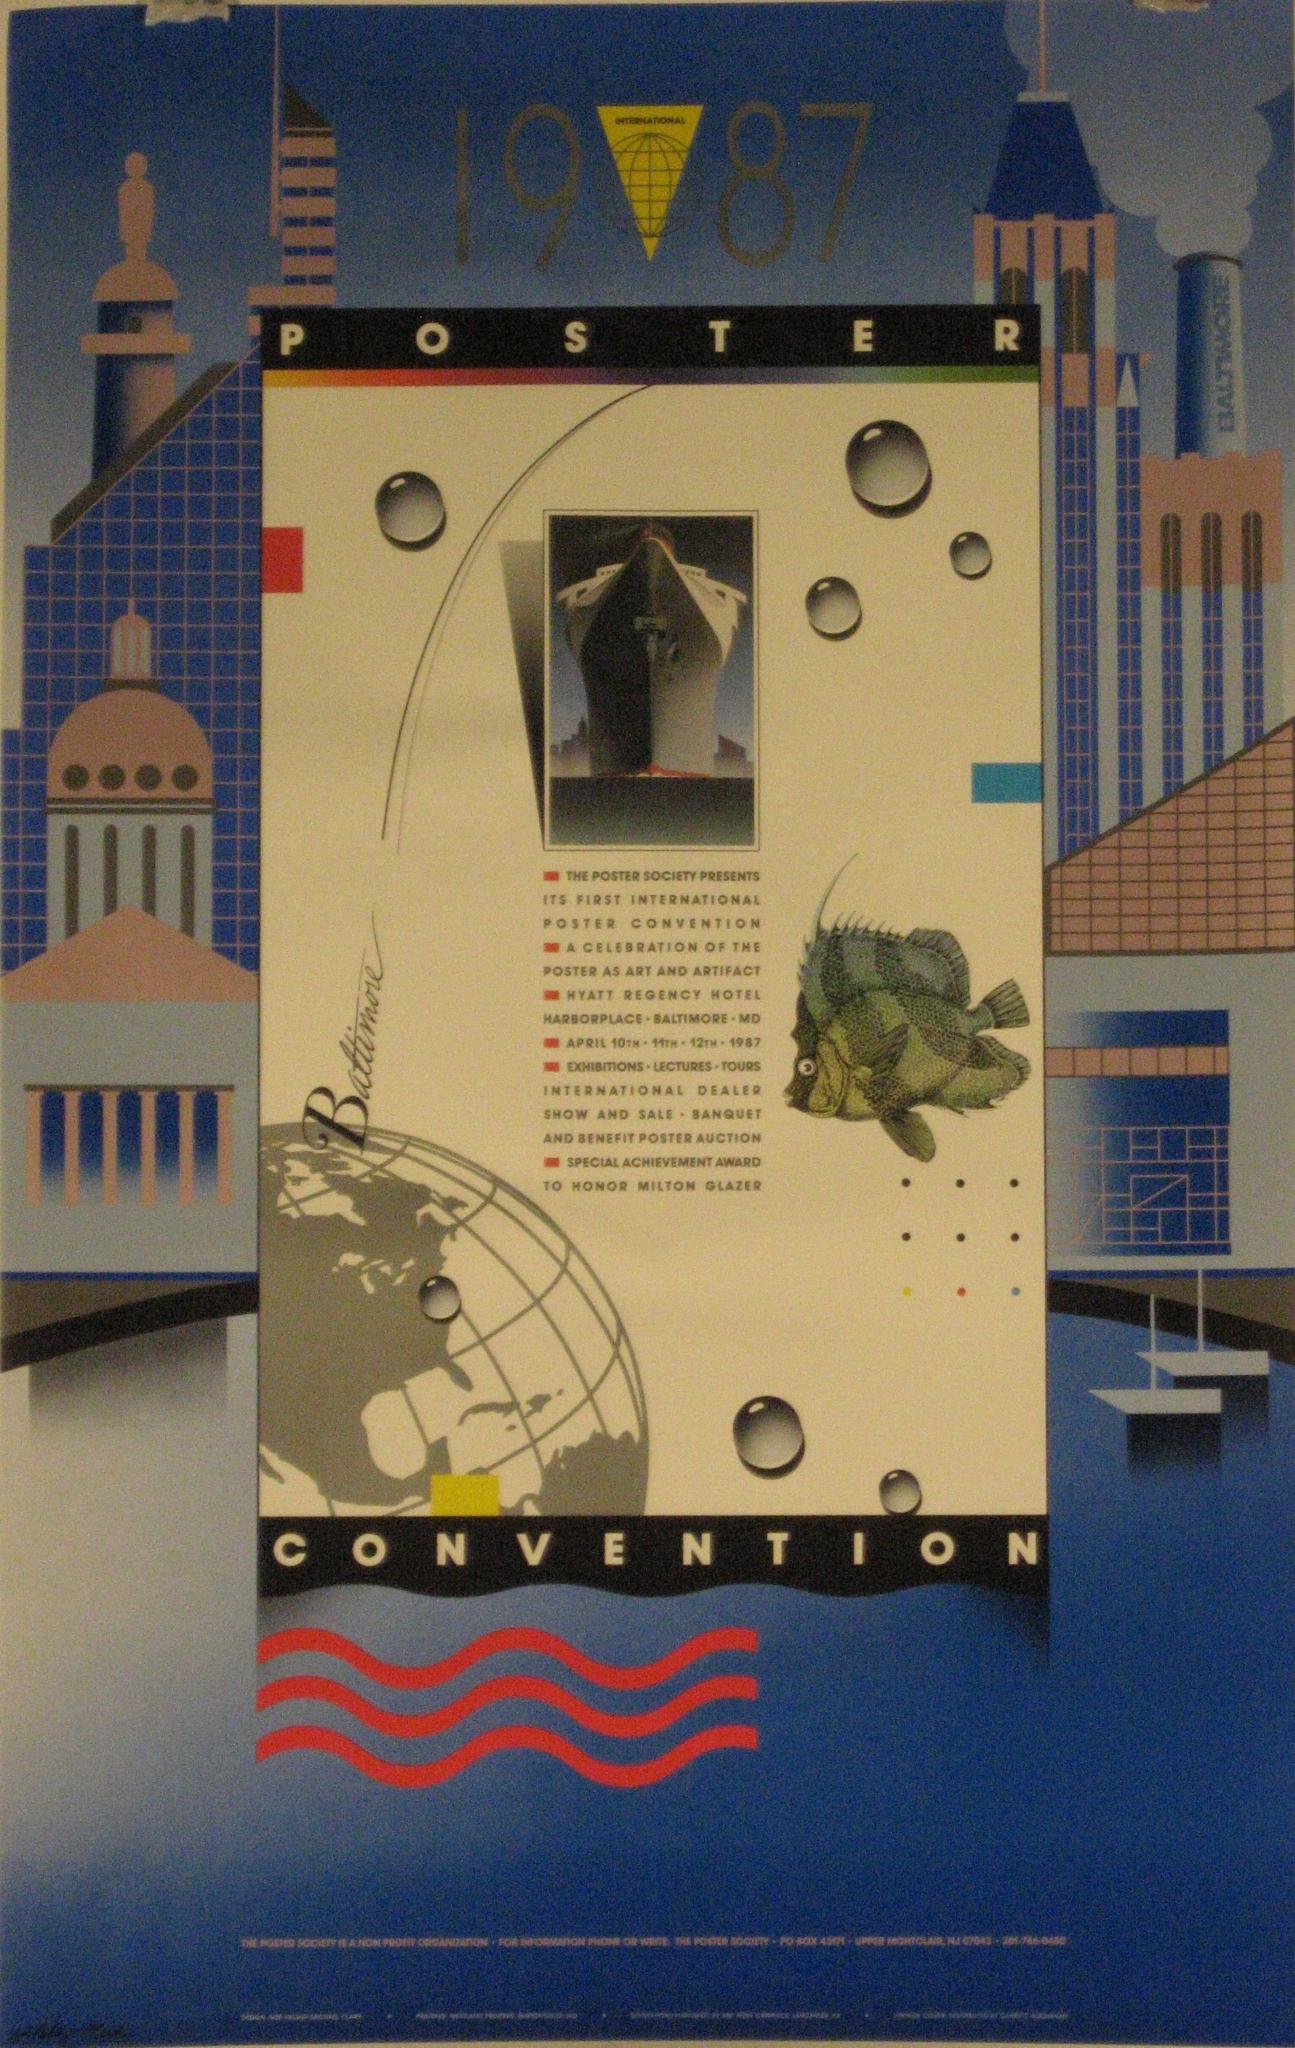 Artist: Illegible

Date of Origin: 1987

Medium: Original Offset Lithograph Vintage Poster

Size: 24” x 38”

 

Poster for the First International Poster Convention held in a hotel in Baltimore Harbor. The convention included exhibitions,